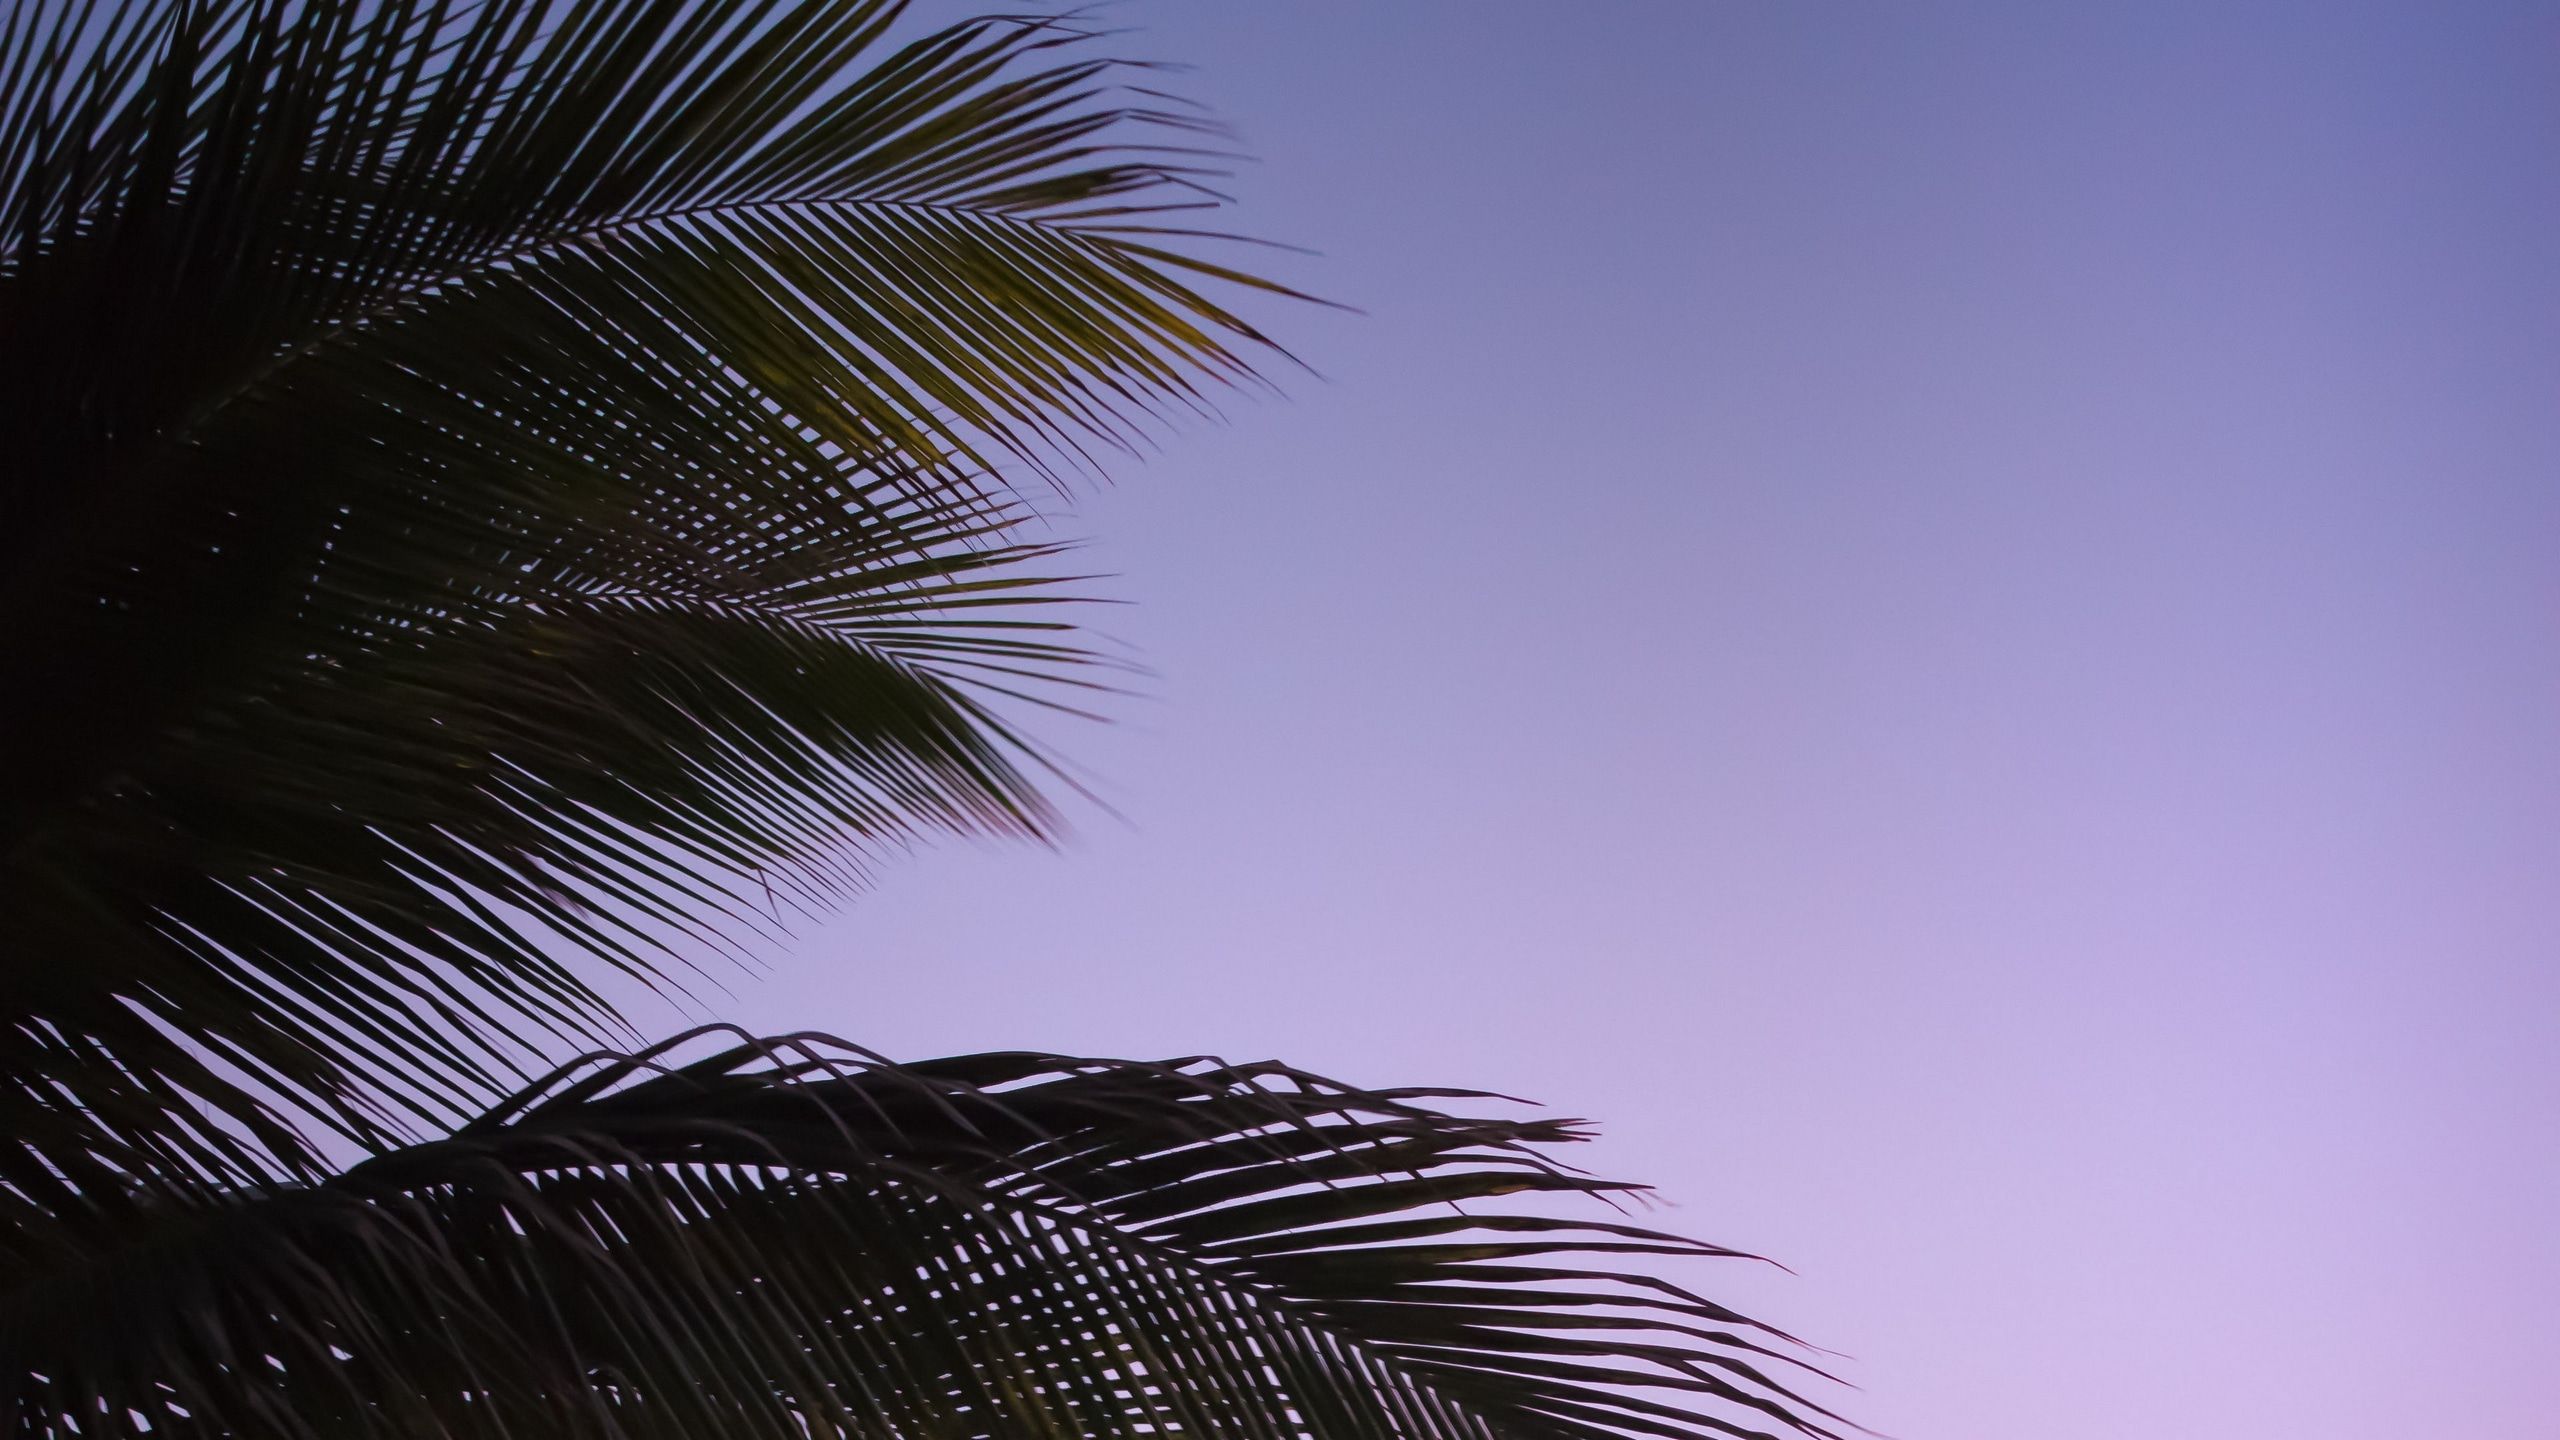 Wallpaper / branch, palm, leaves, sky, sunset, evening, 4k free download